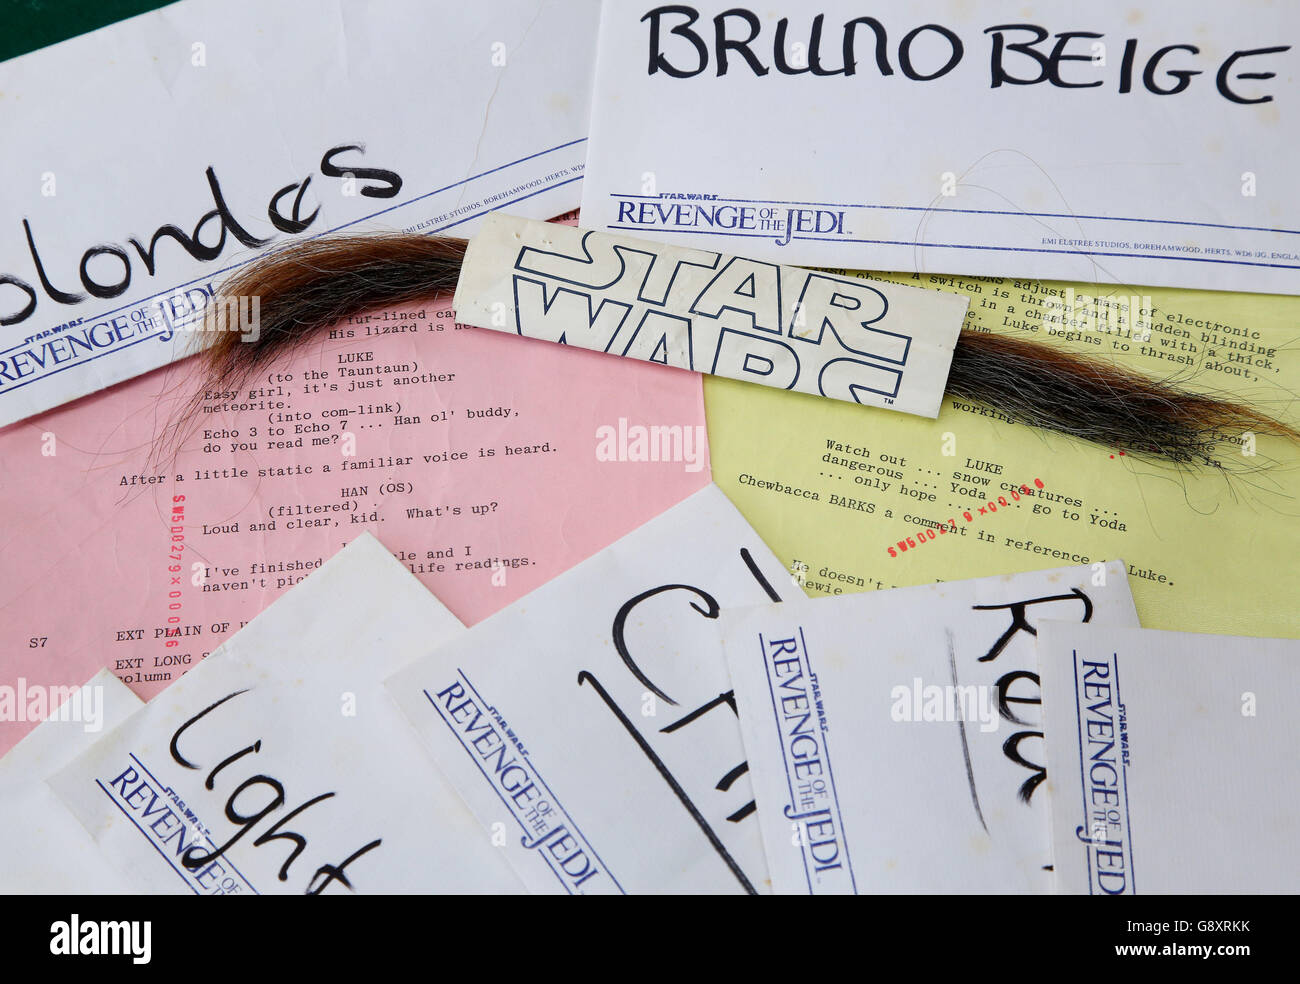 A view of Star Wars memorabilia and scripts on view at Catherine Southon Auctioneers in Bromley, Kent, part of a collection of make-up related items from Stuart Freeborn, who was in charge of make-up for the first three Star Wars films. Stock Photo